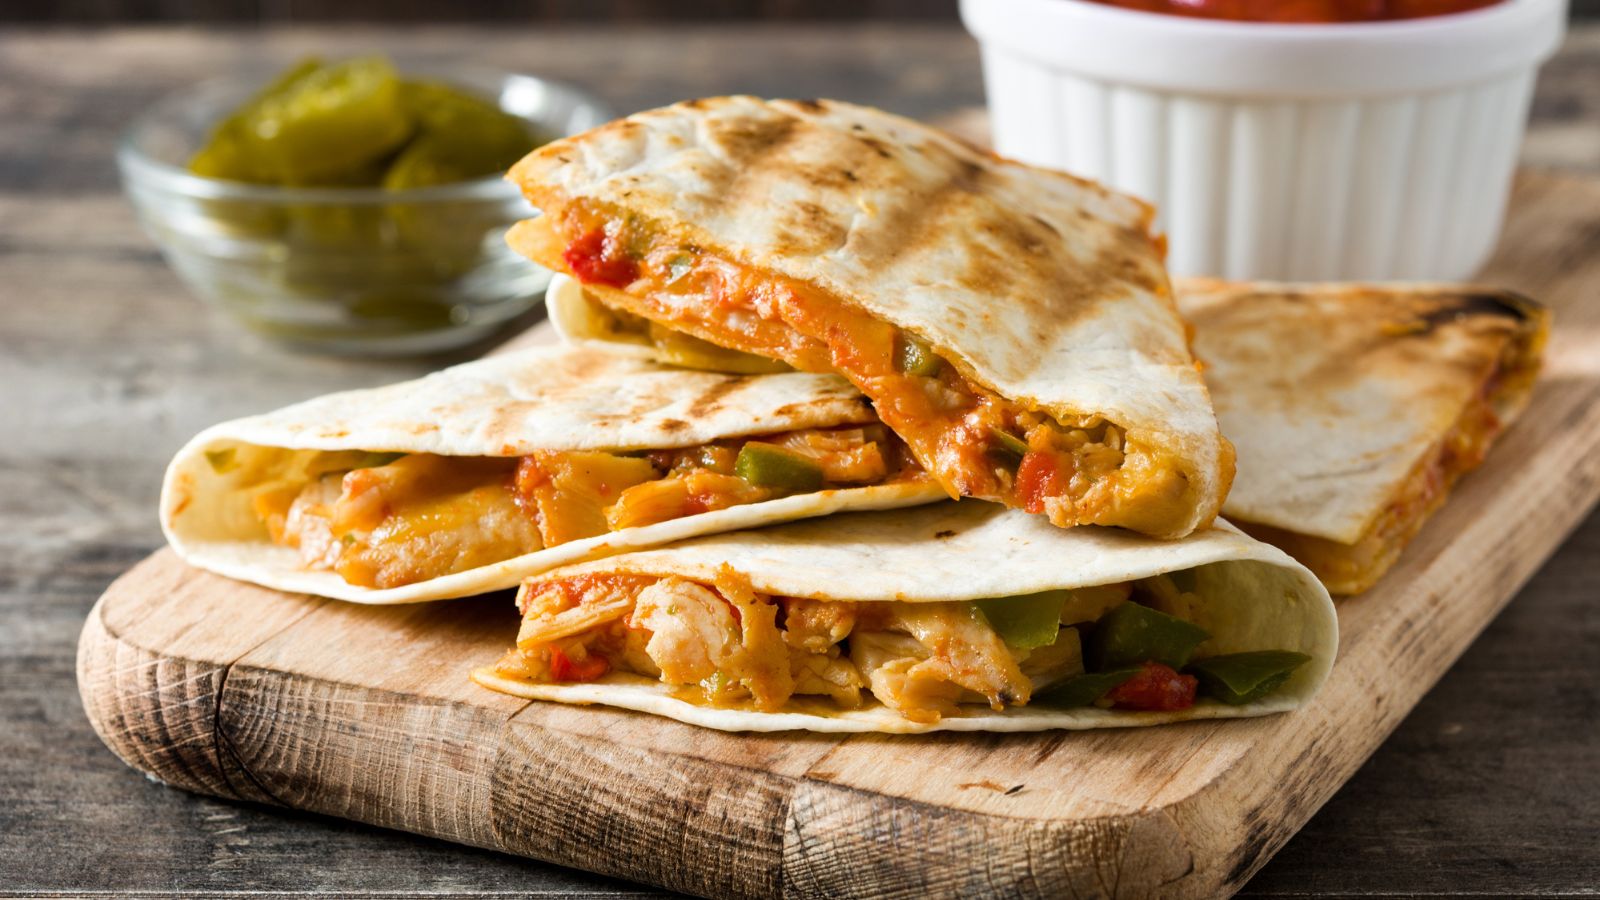 Lazy Lunches Made Healthy: 21 Quick and Tasty Ideas for Fat Loss